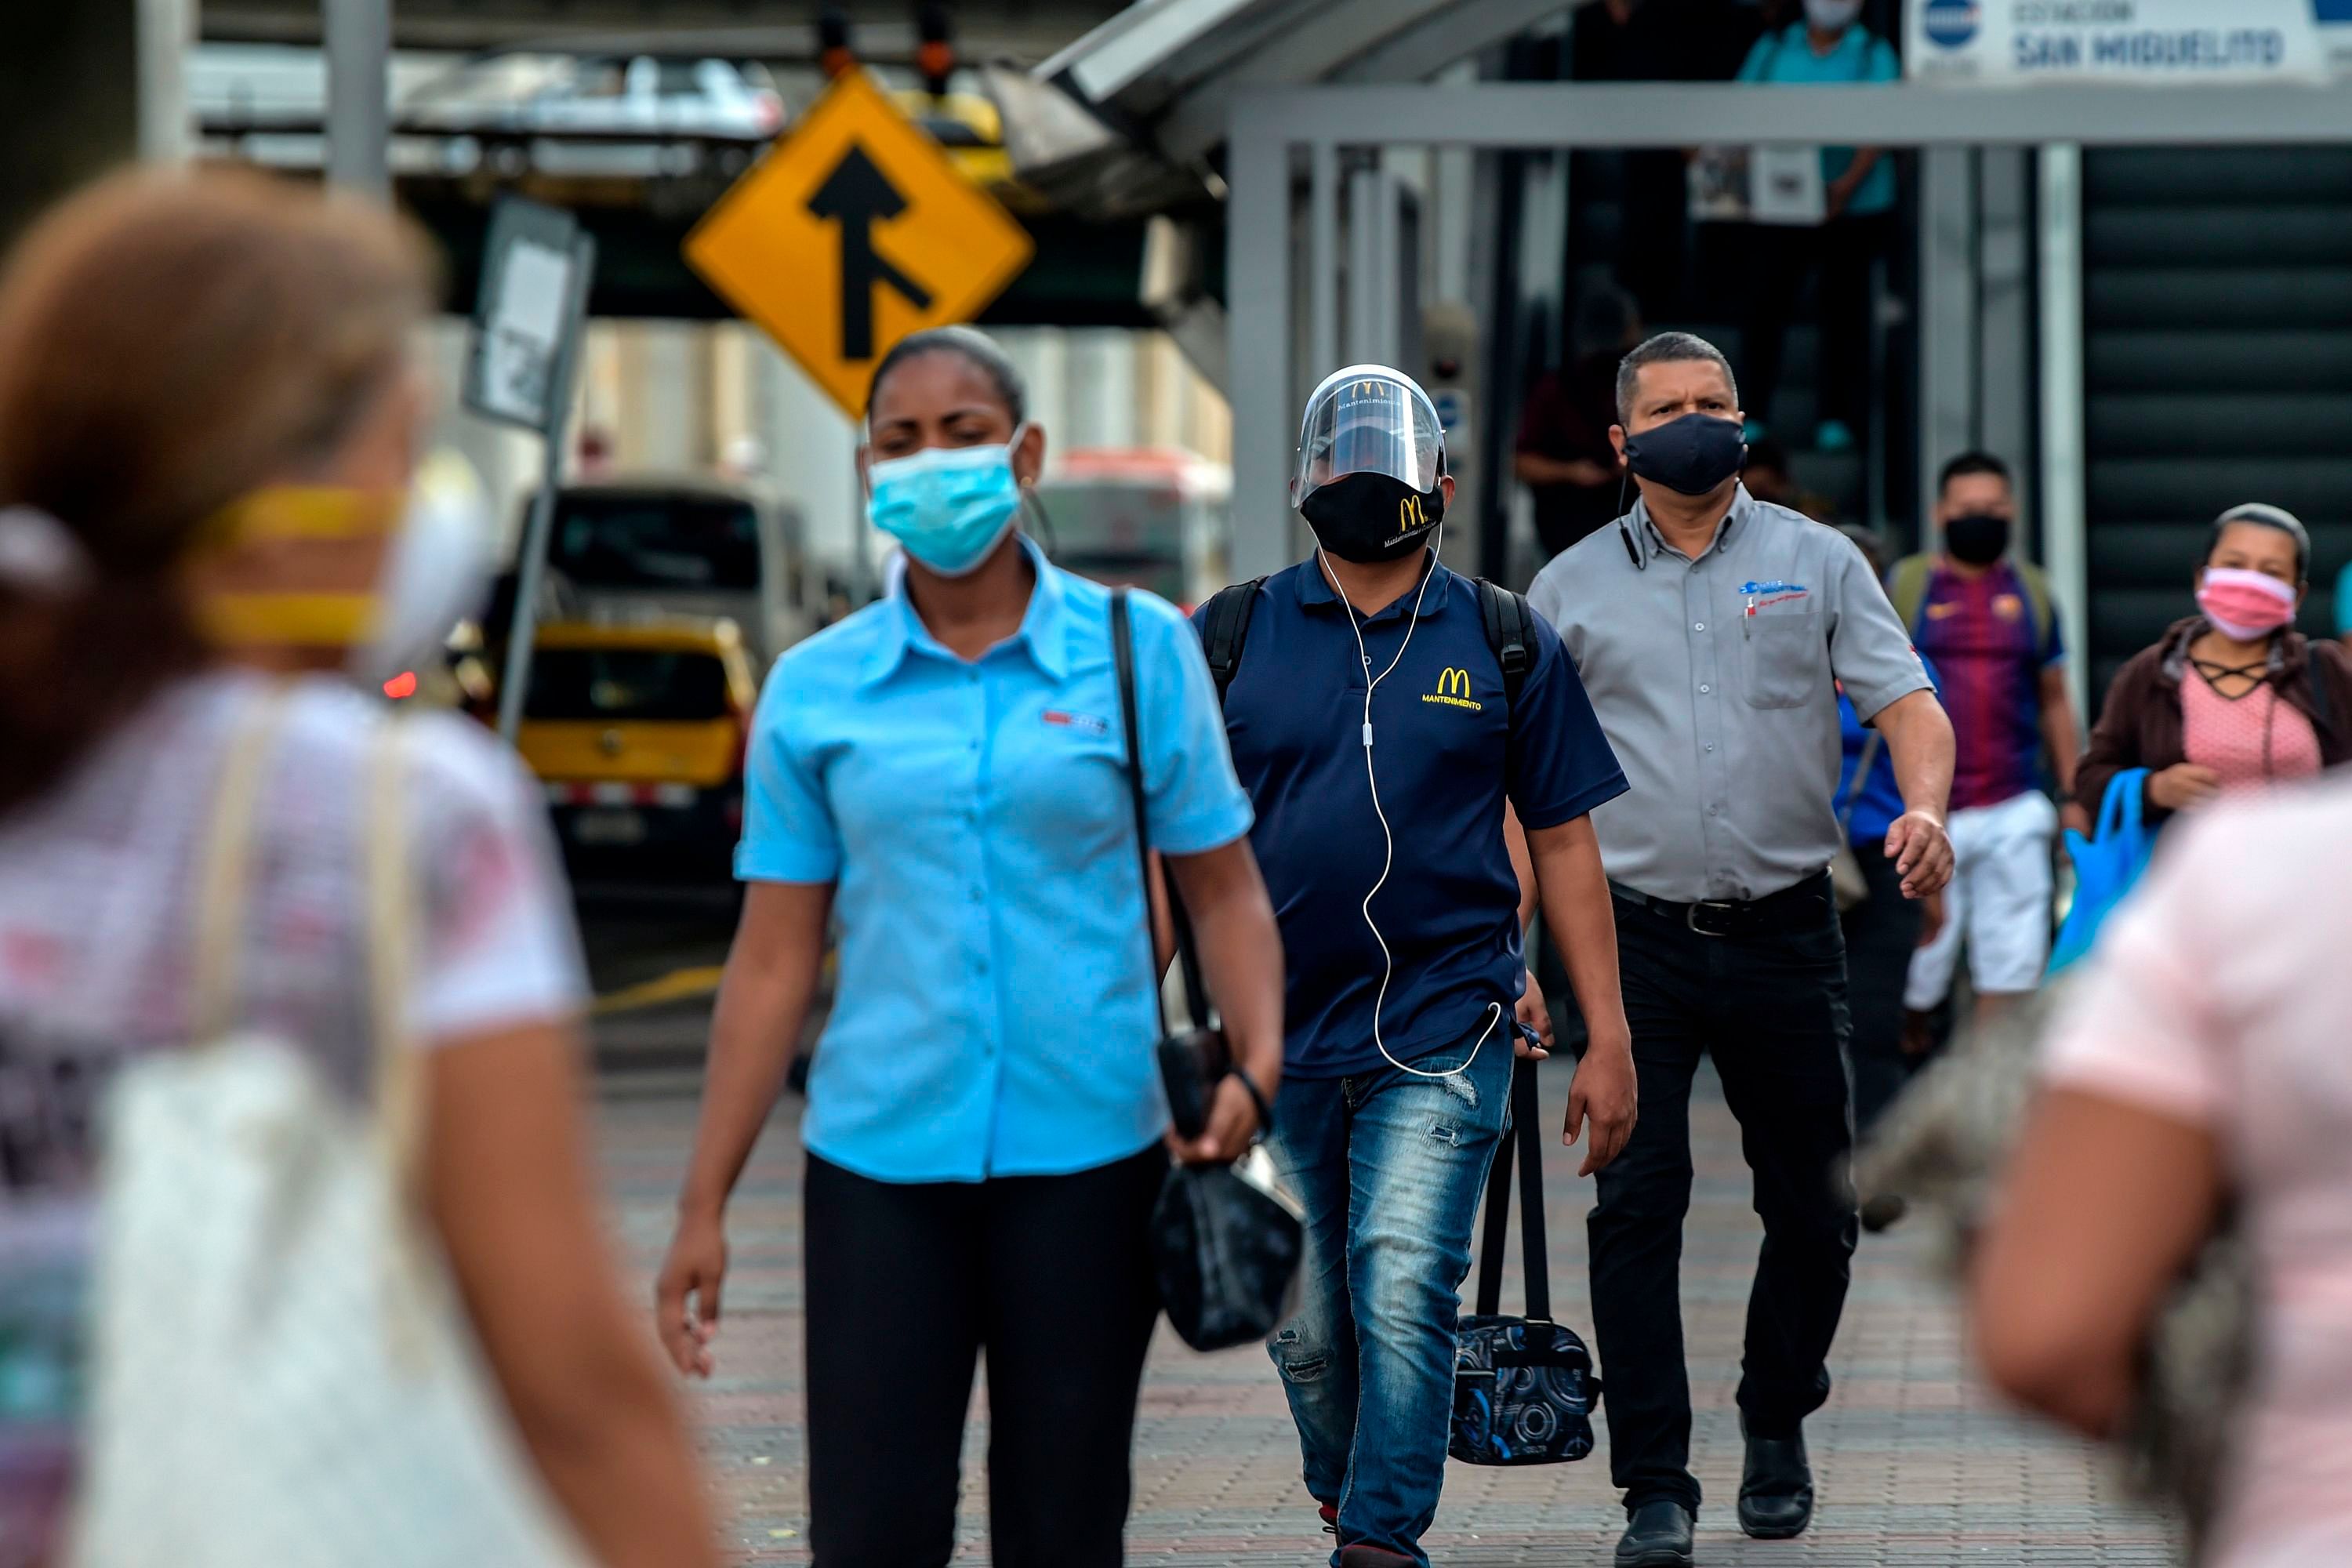 People wear face masks amid concern over the spread of the COVID-19 coronavirus, in Panama City. (AFP Photo)